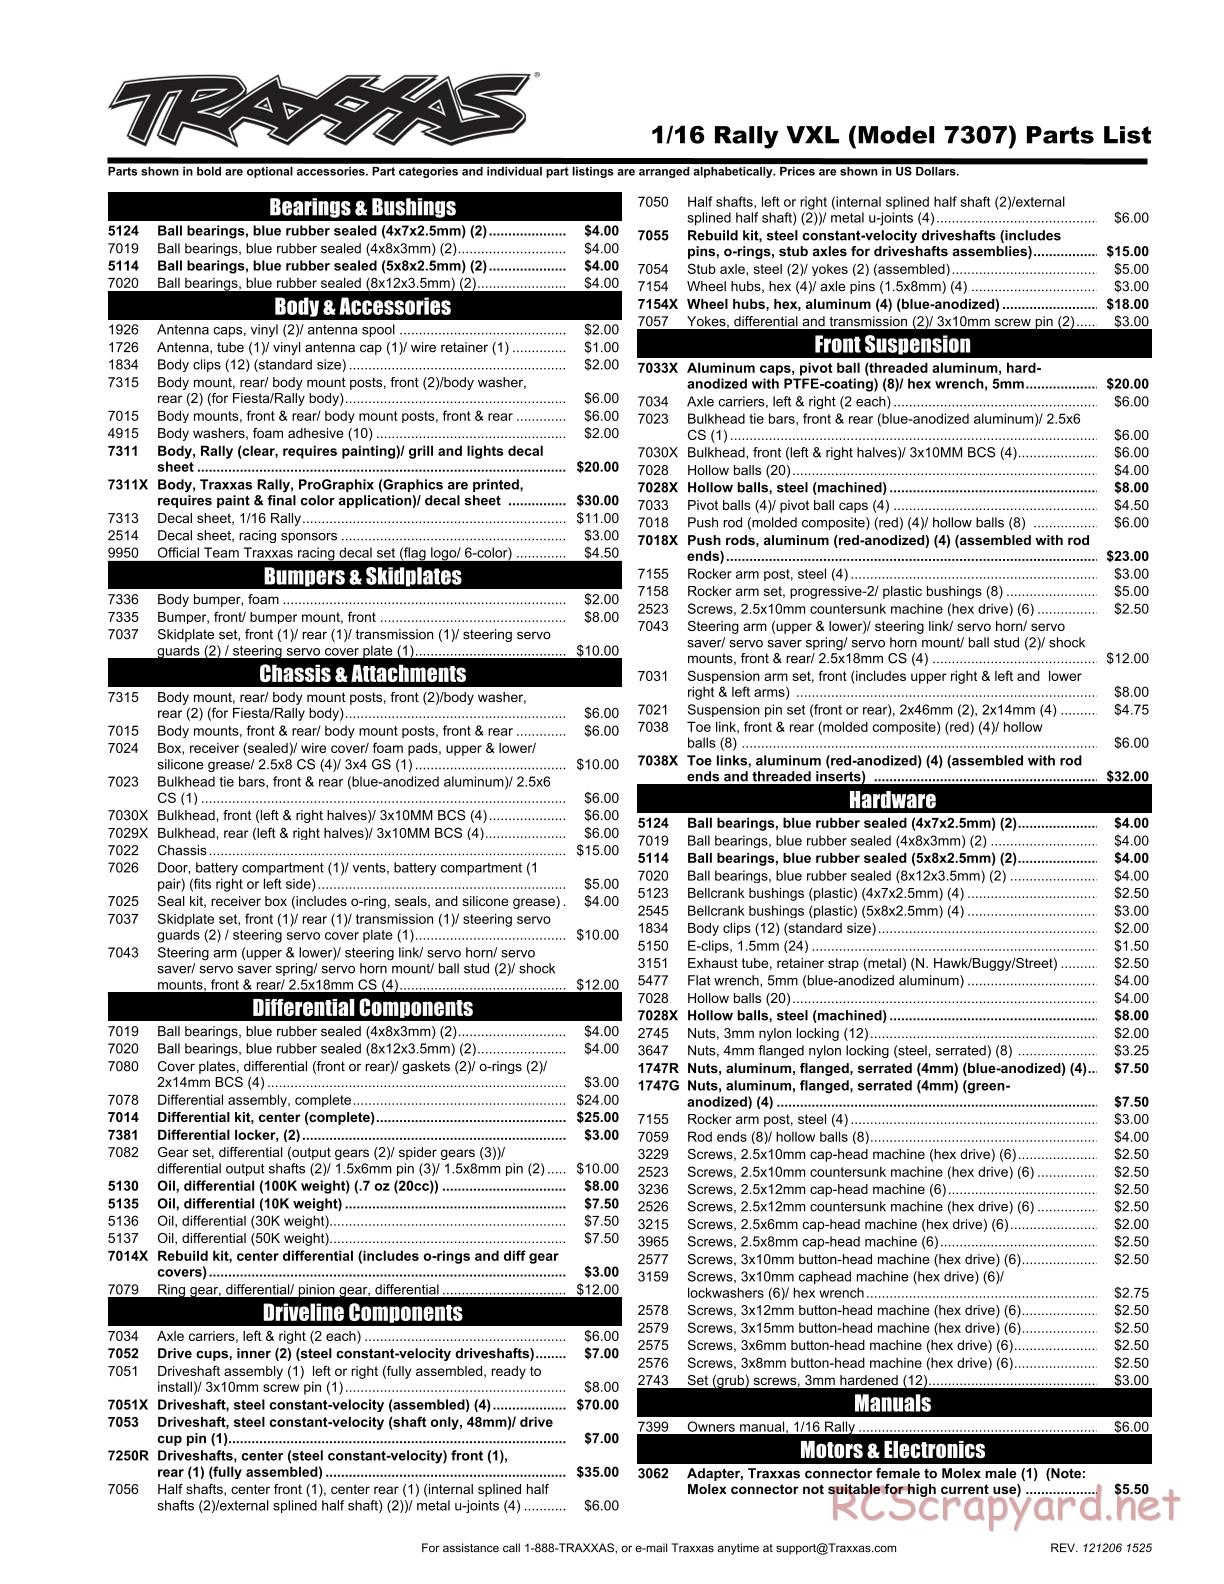 Traxxas - 1/16 Rally VXL (2010) - Parts List - Page 1